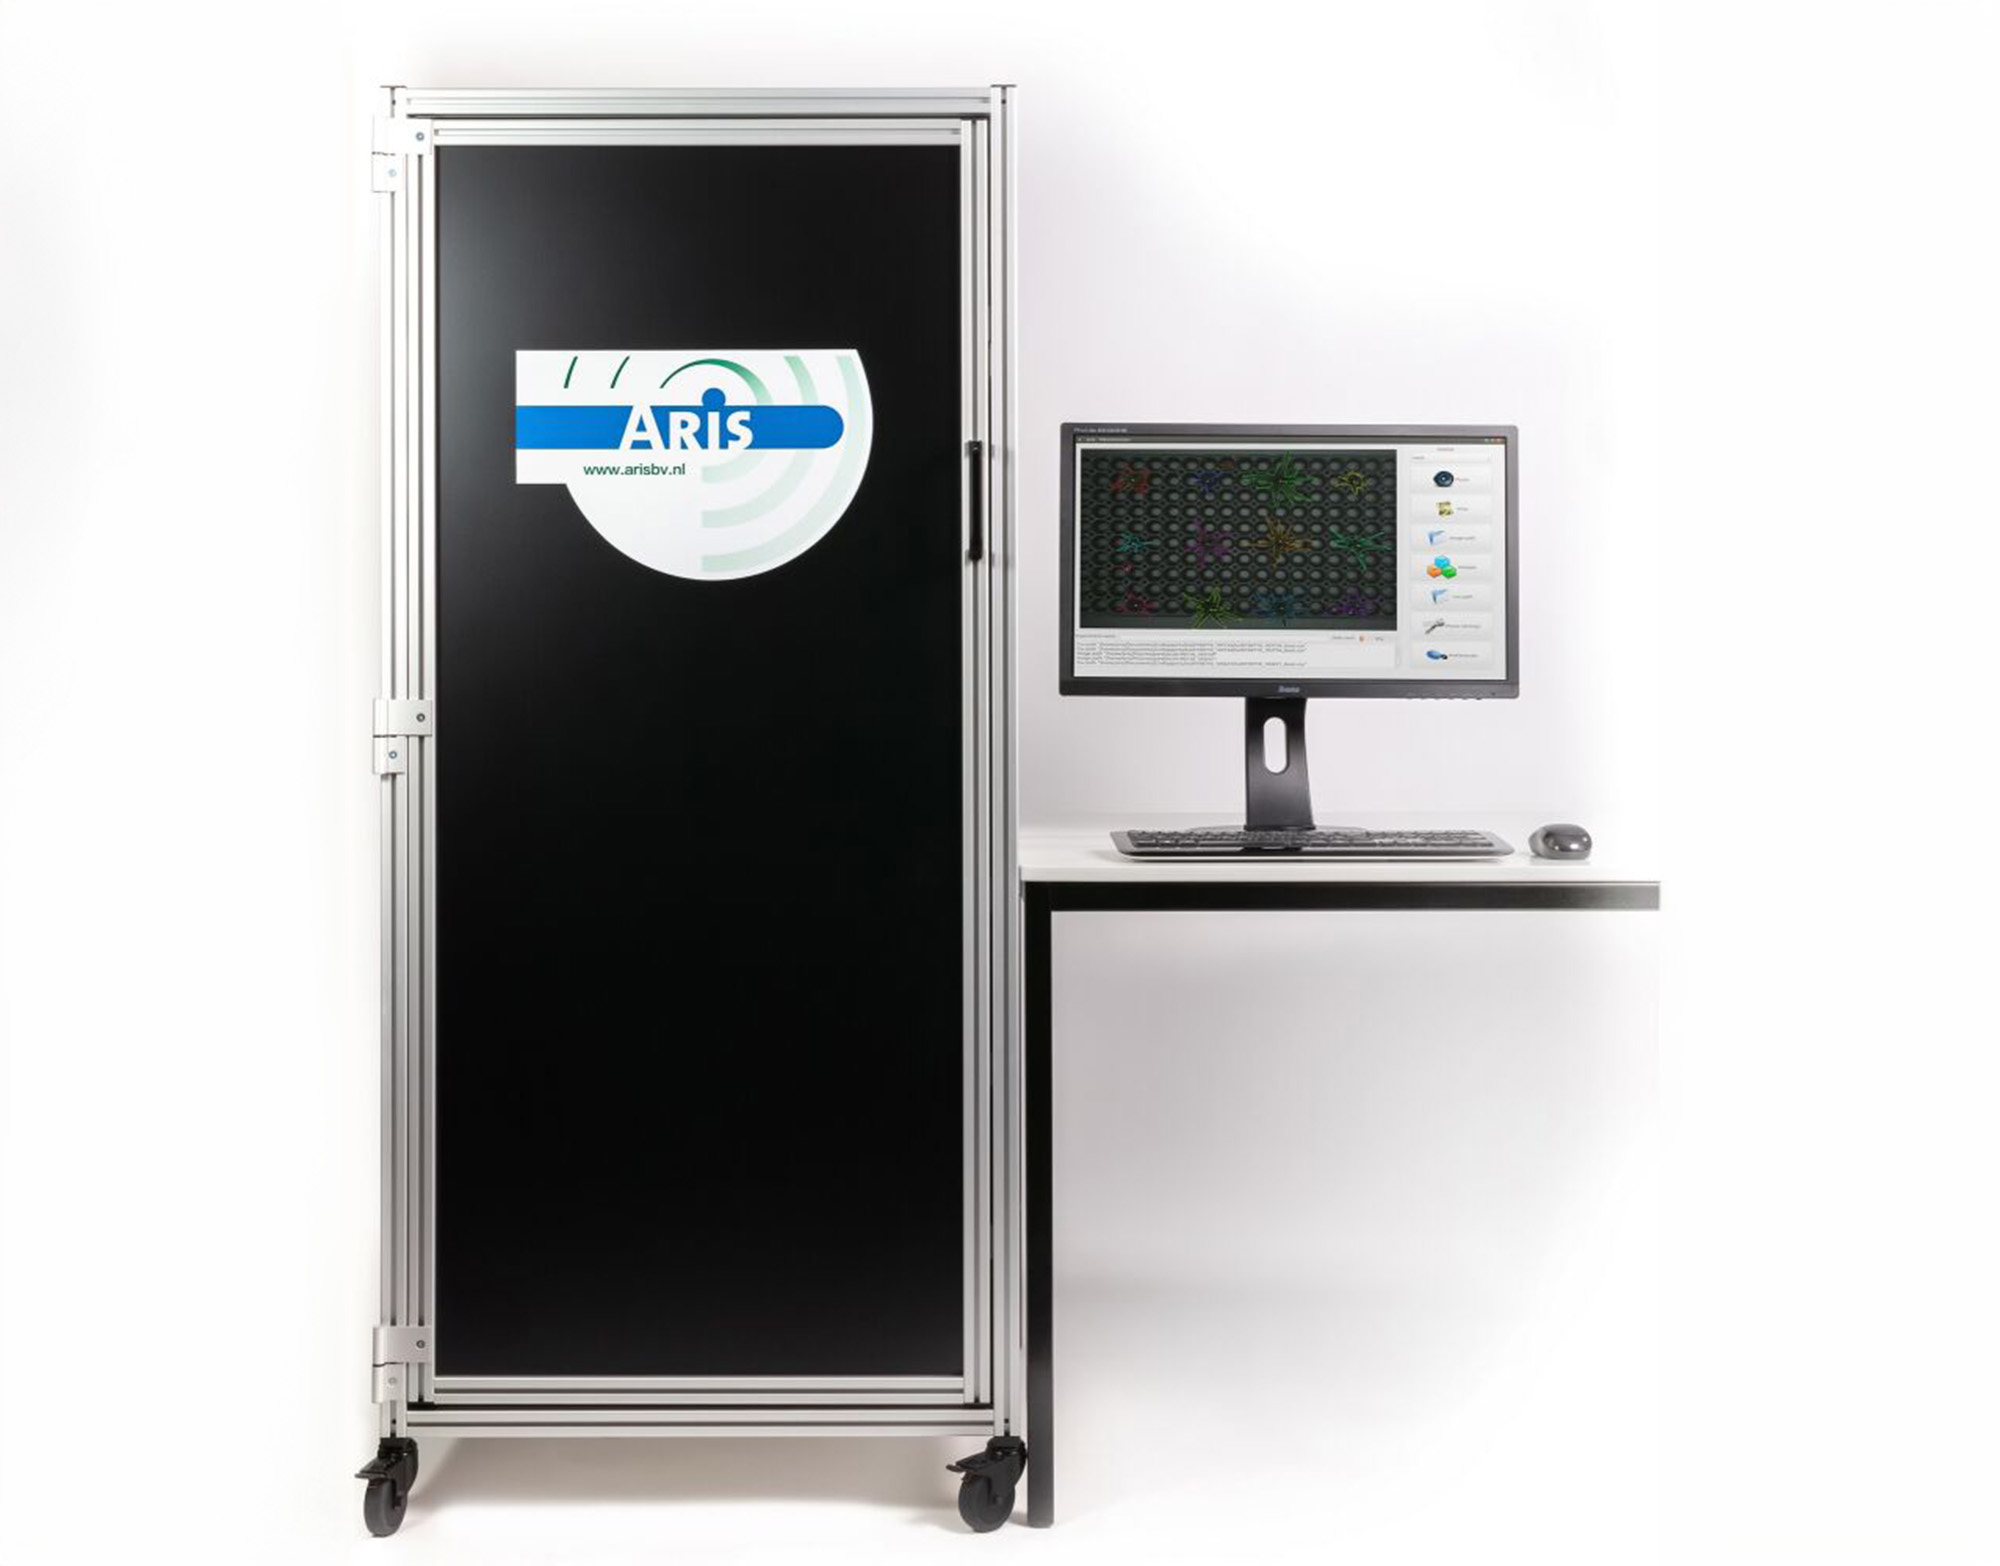 Aris top-view phenotyping system